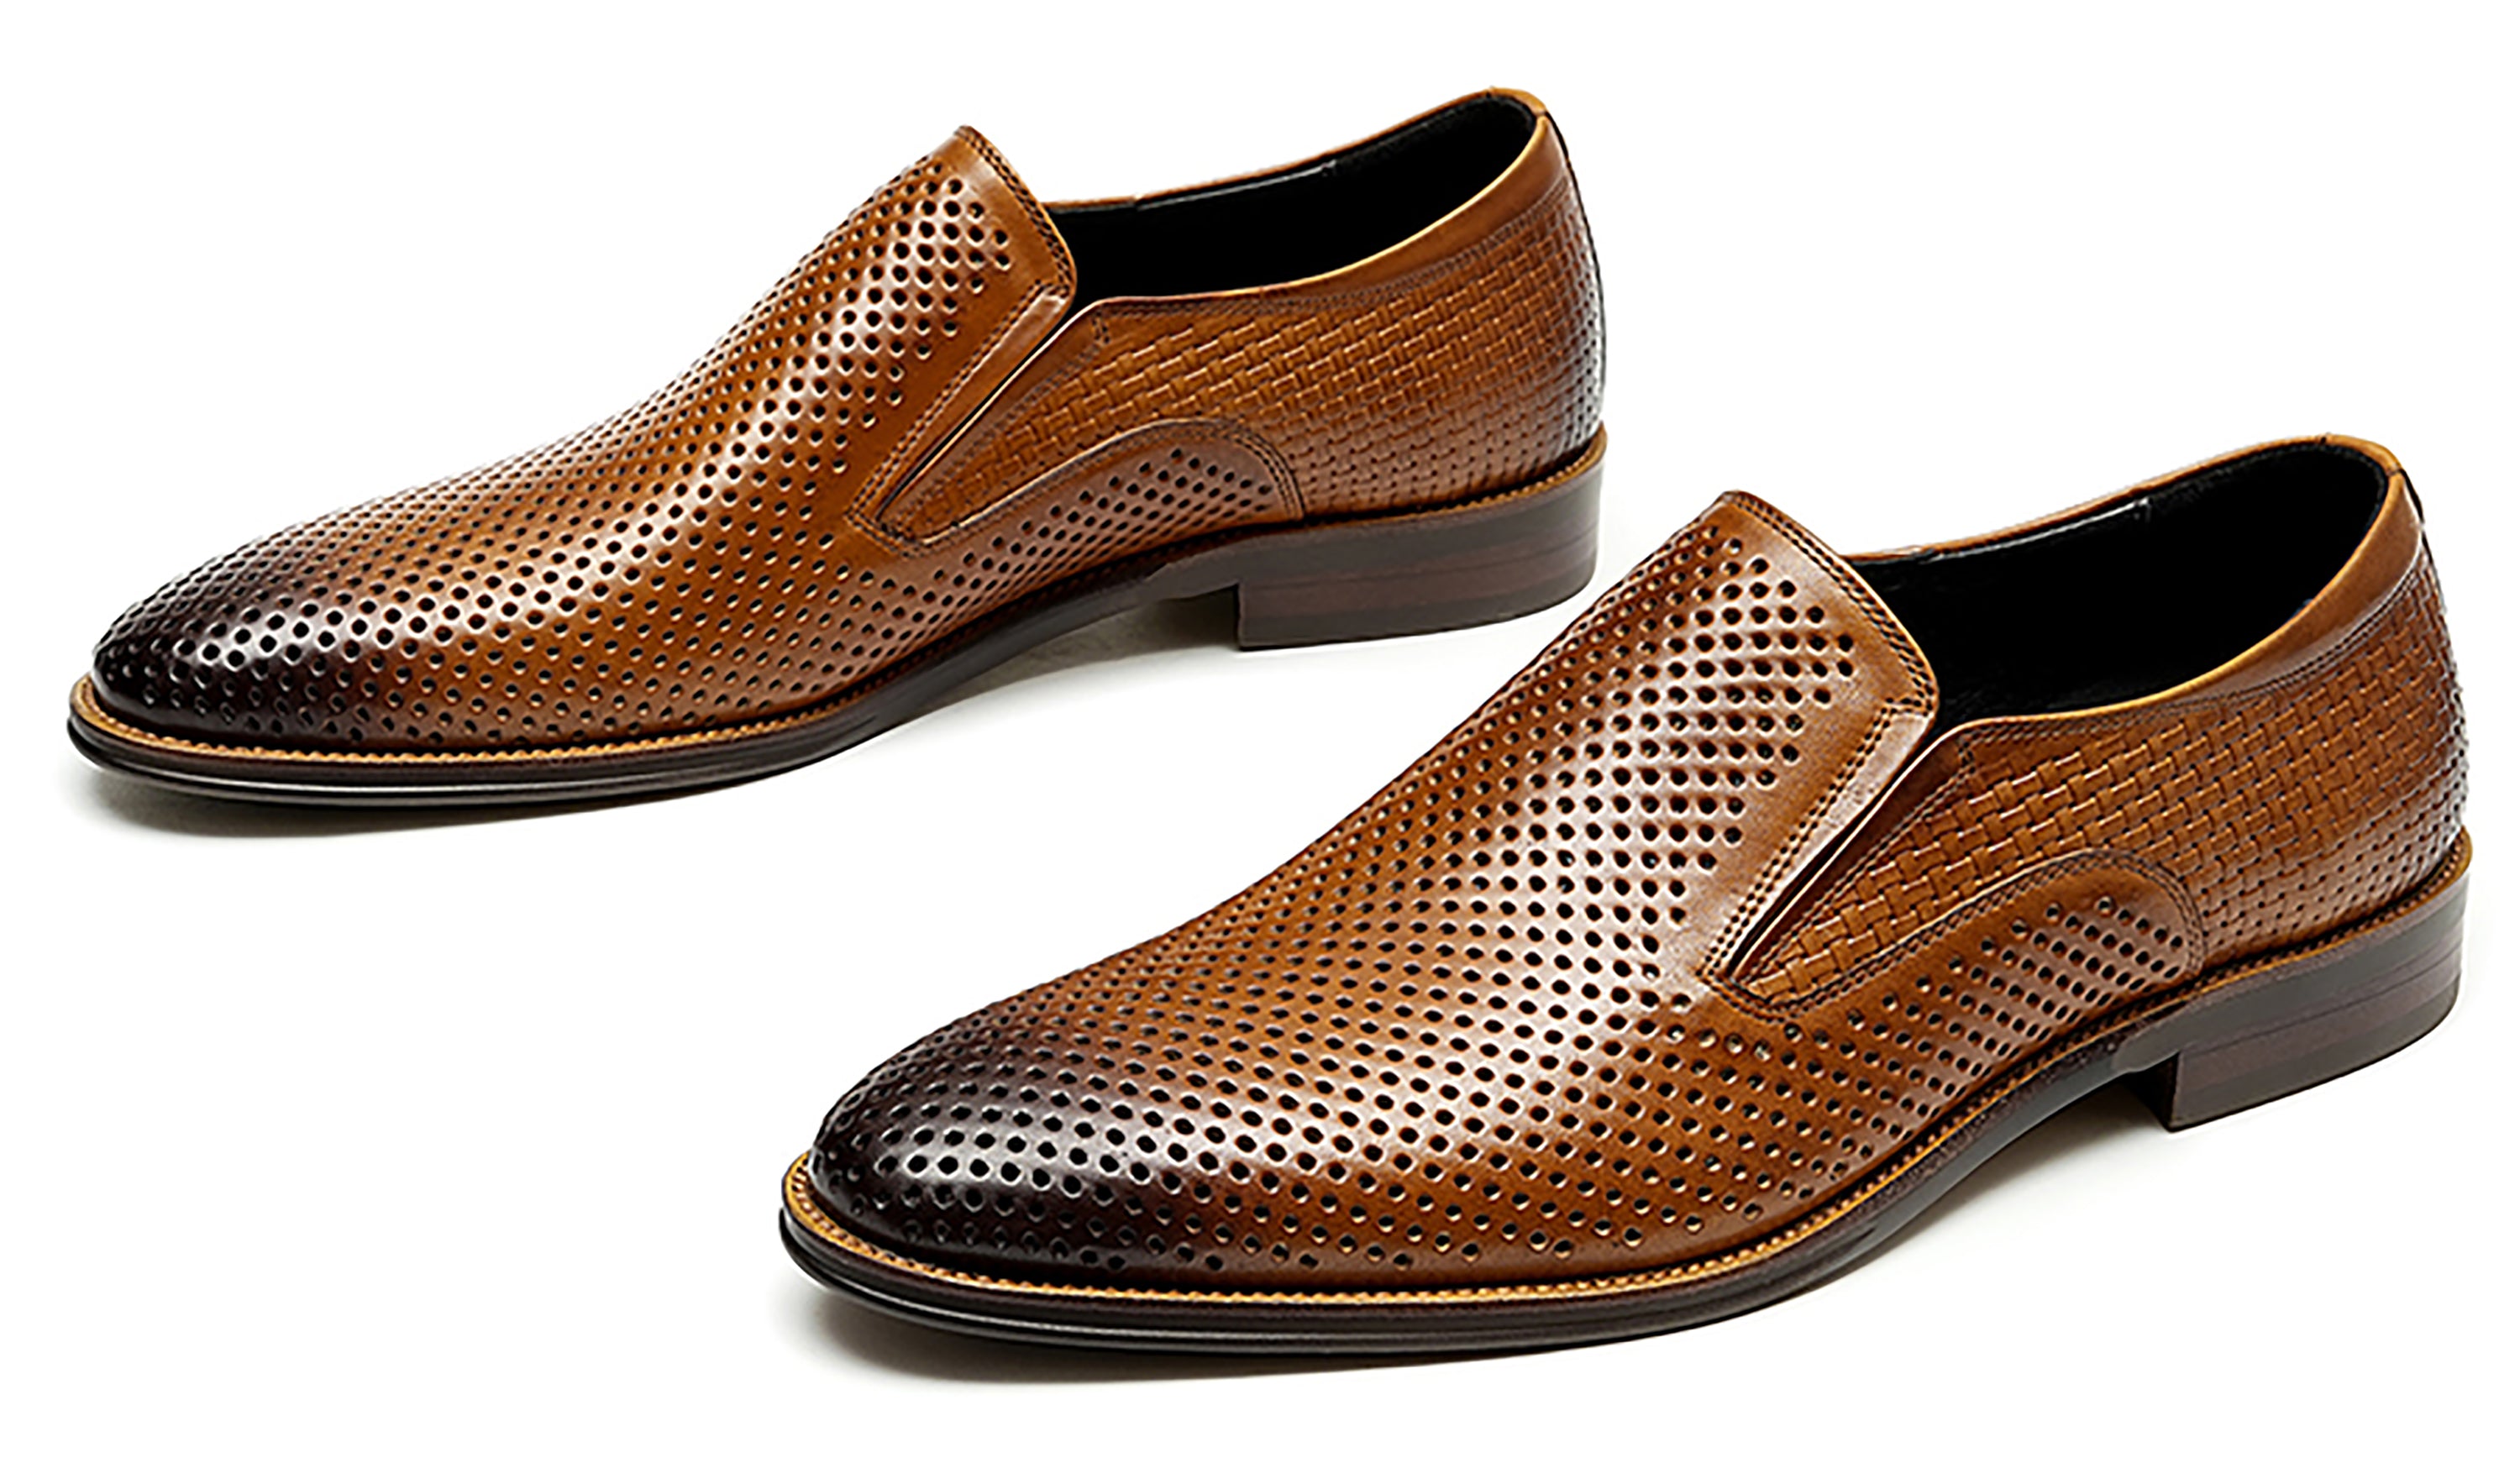 Men's Hollow Dress Formal Penny Loafers